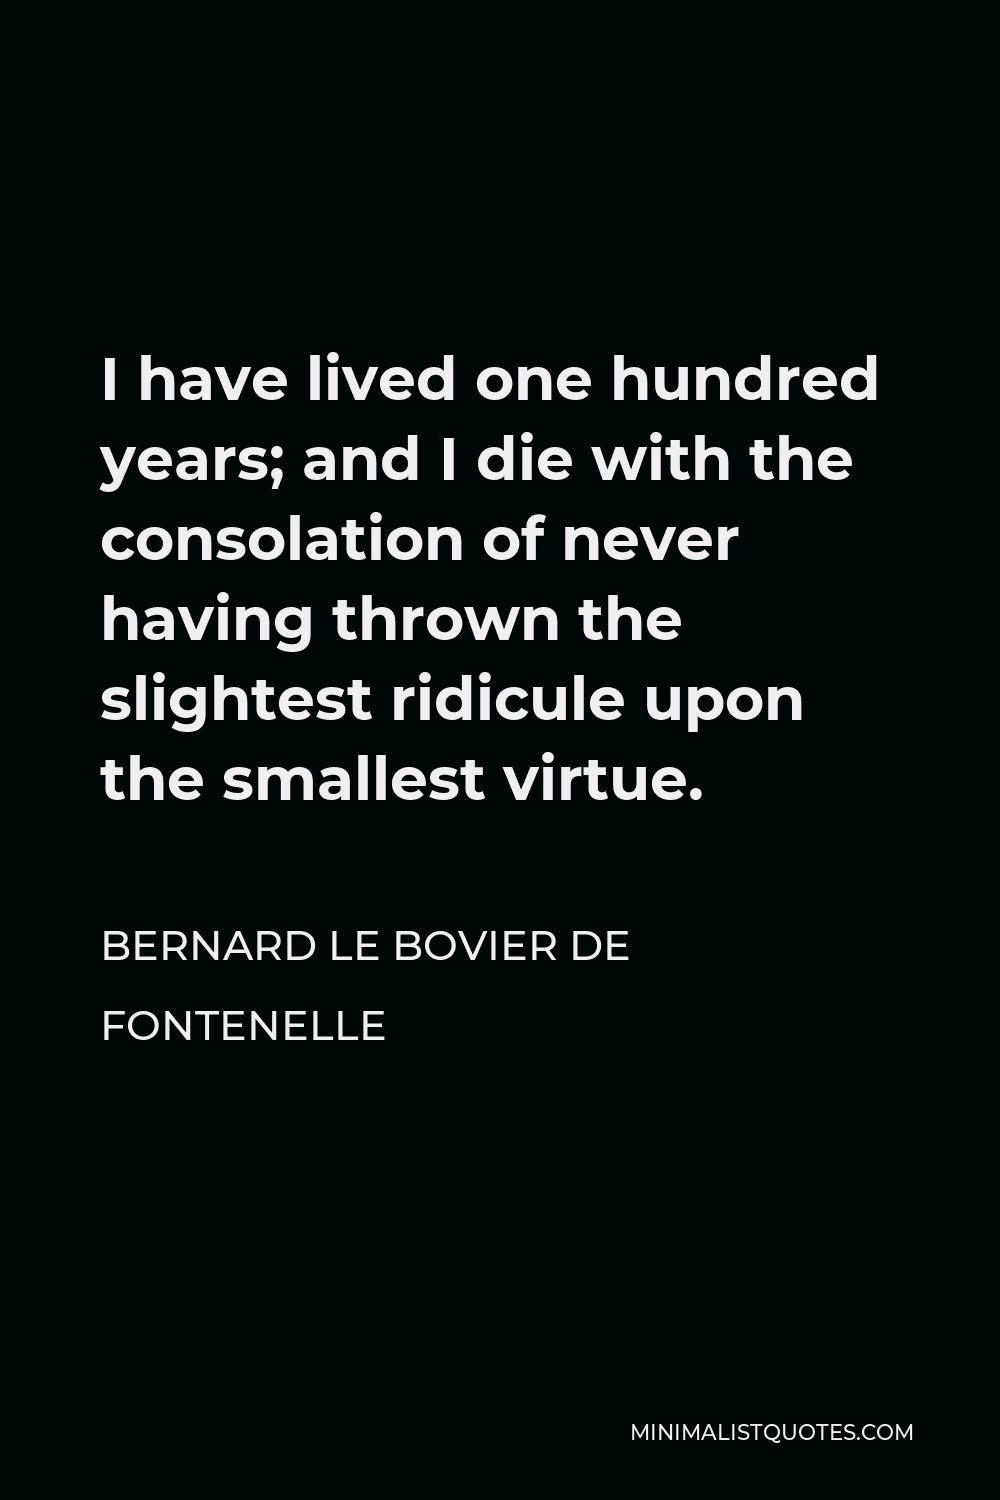 Bernard le Bovier de Fontenelle Quote - I have lived one hundred years; and I die with the consolation of never having thrown the slightest ridicule upon the smallest virtue.